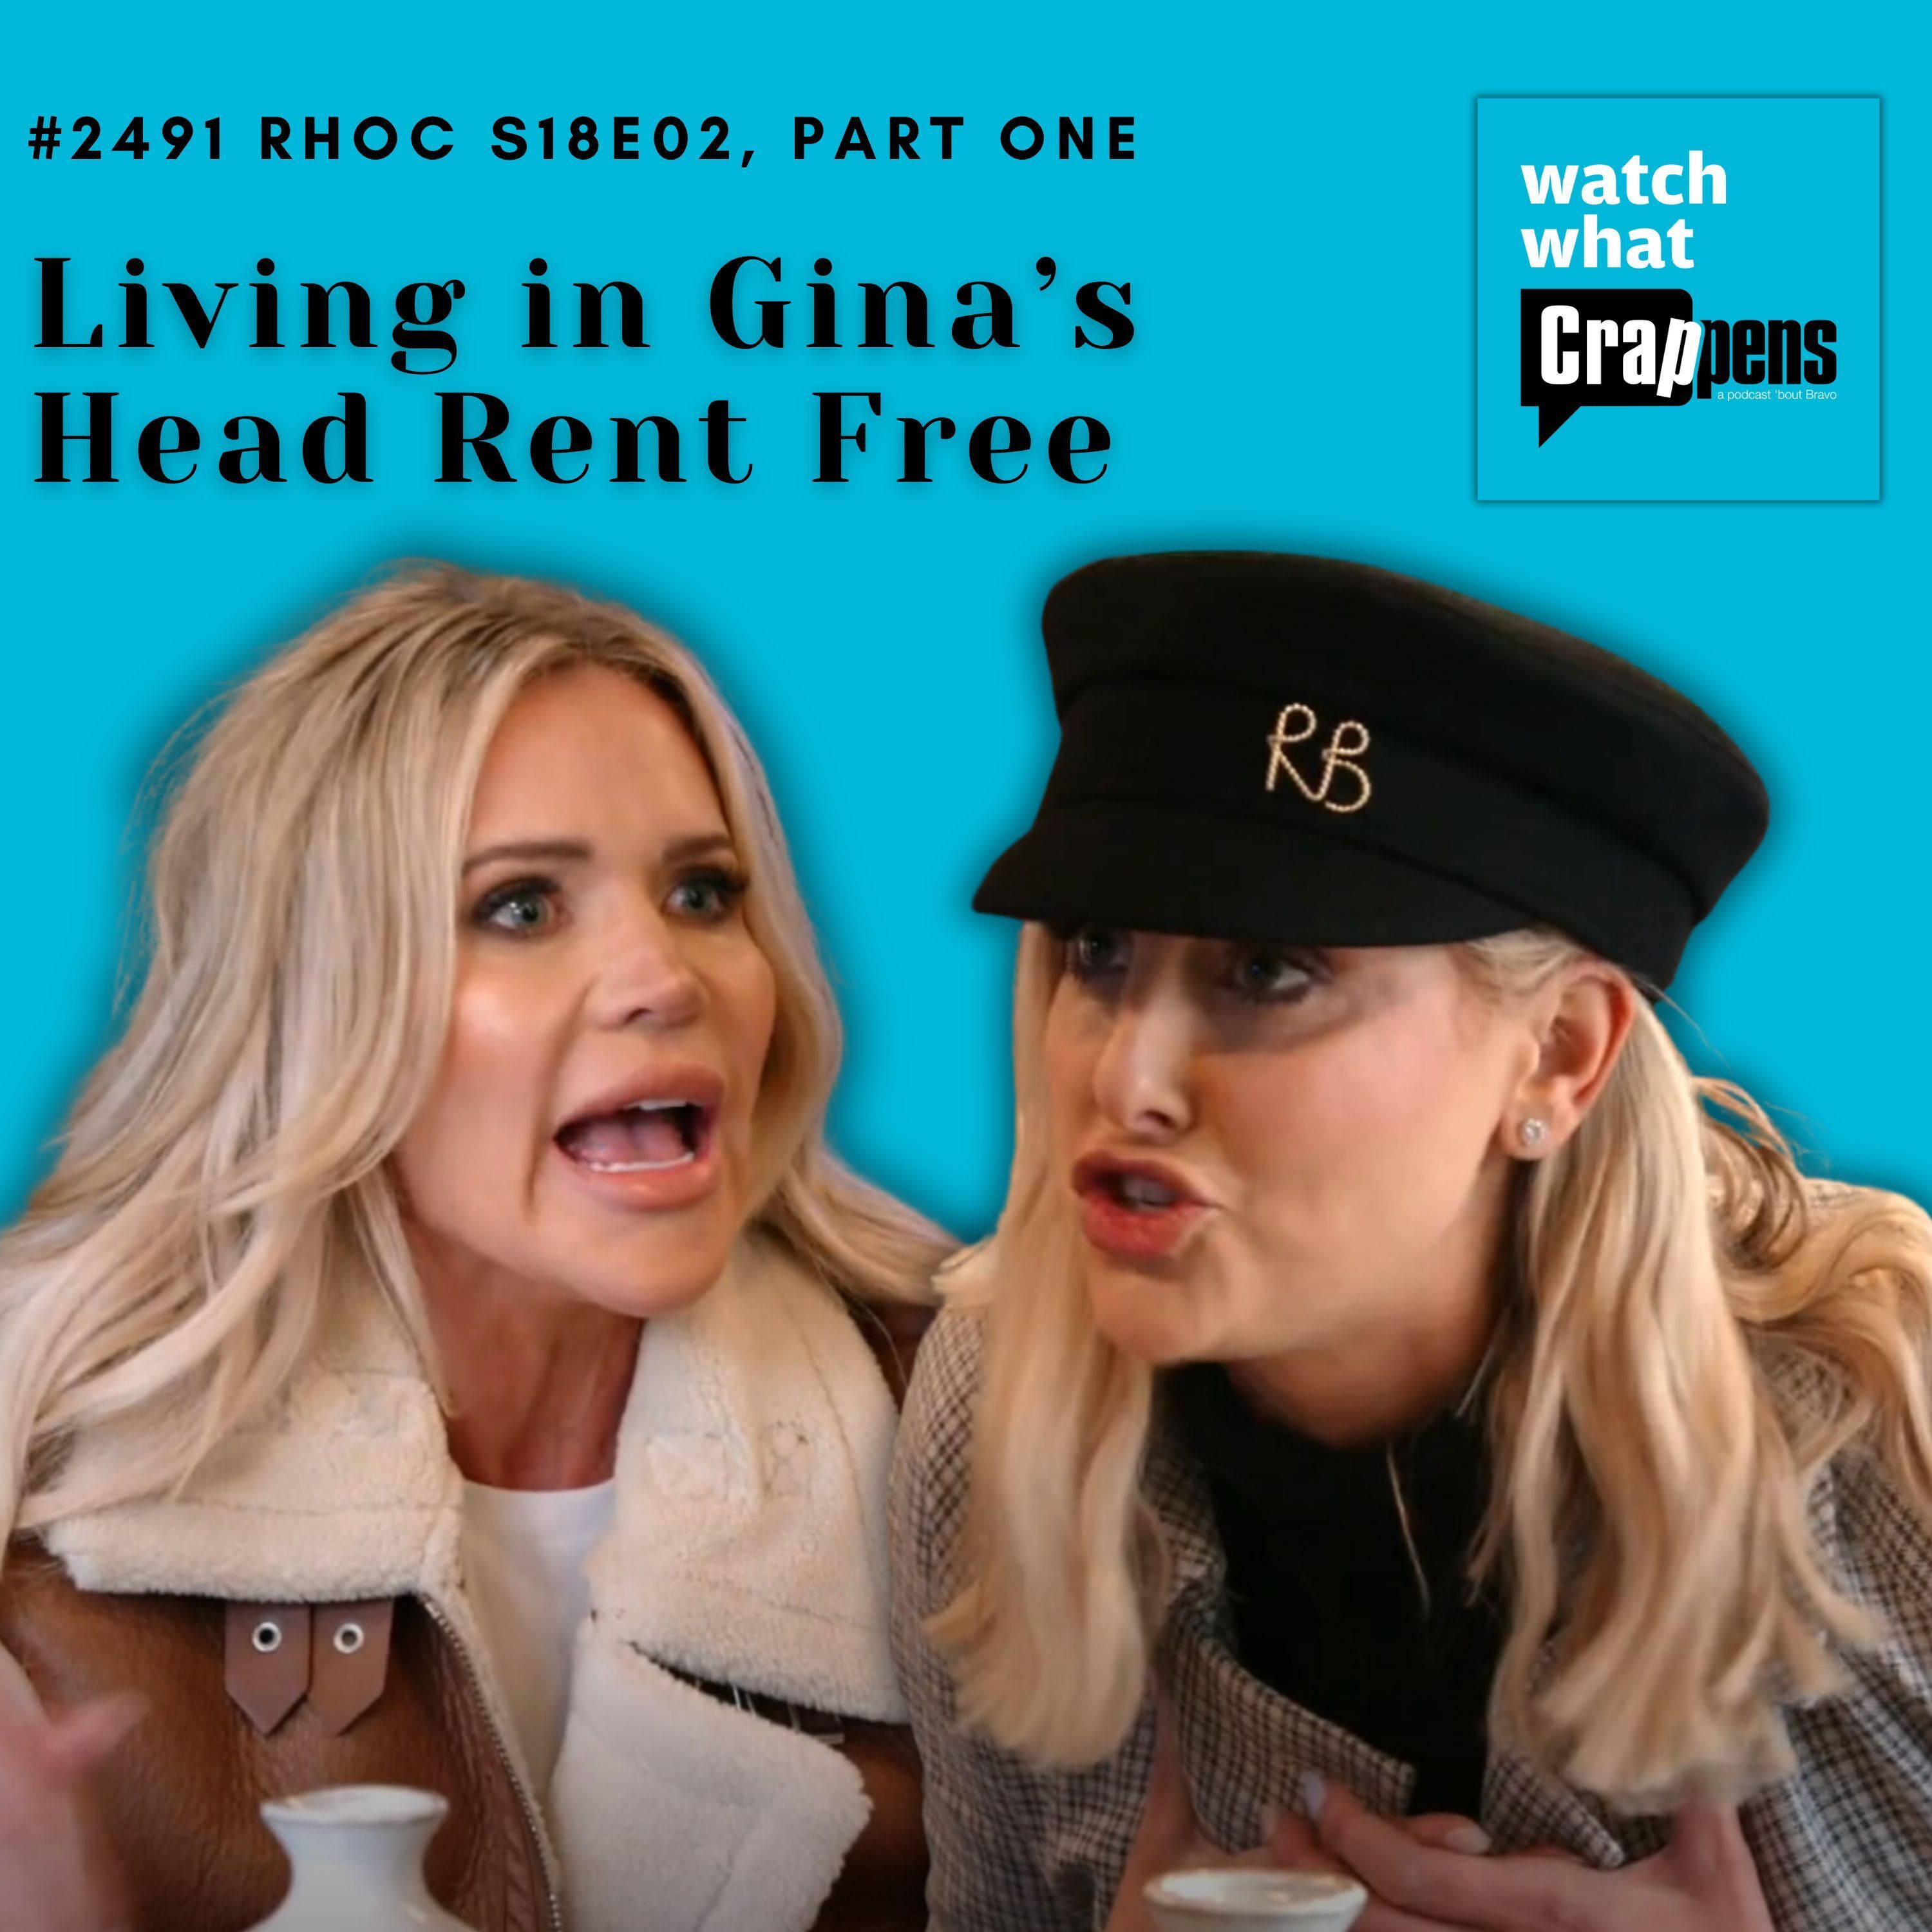 #2491 RHOC S18E02:  Living in Gina’s Head Rent Free, Part 1